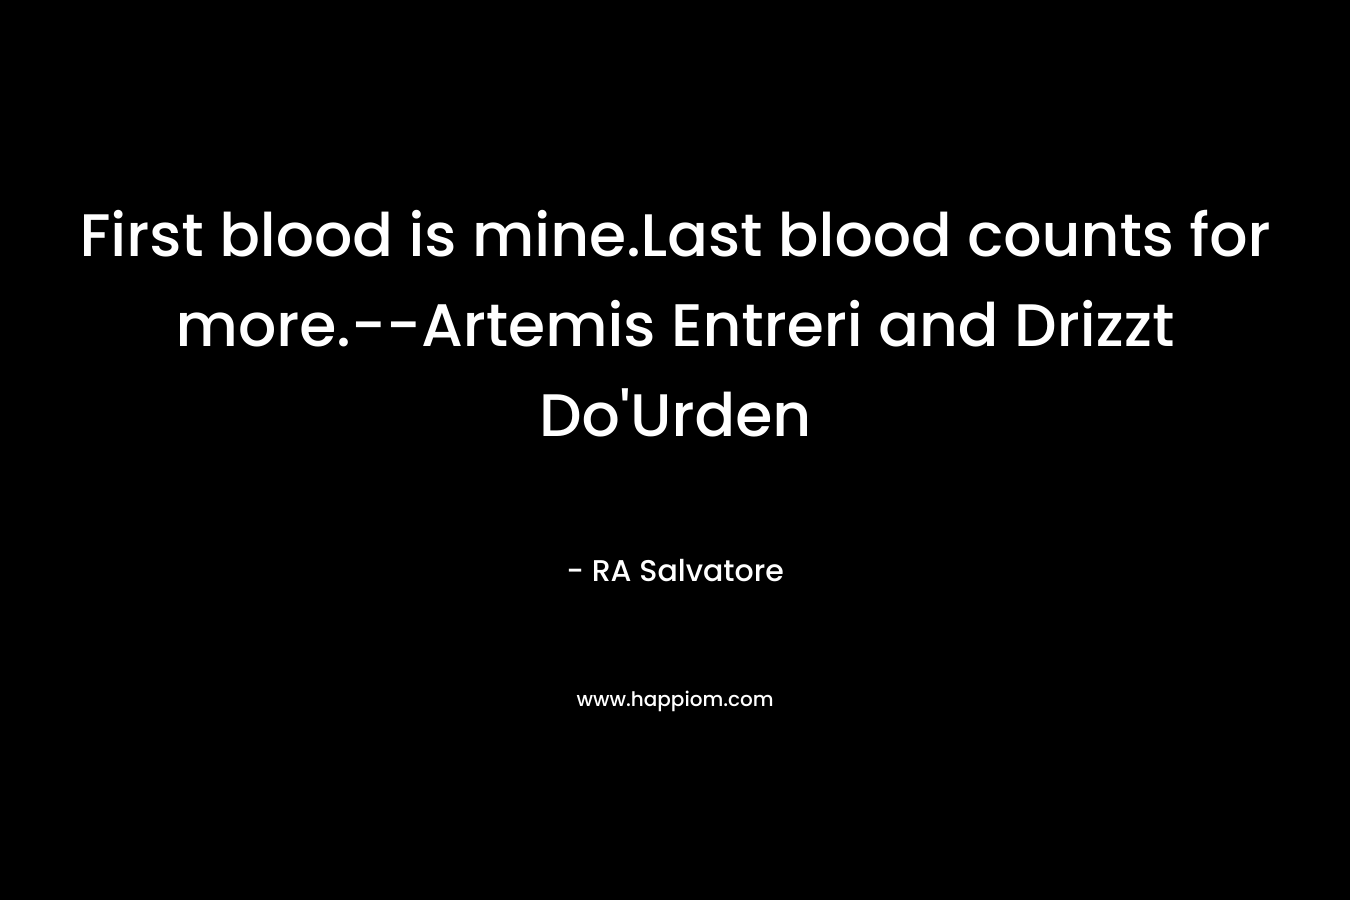 First blood is mine.Last blood counts for more.--Artemis Entreri and Drizzt Do'Urden